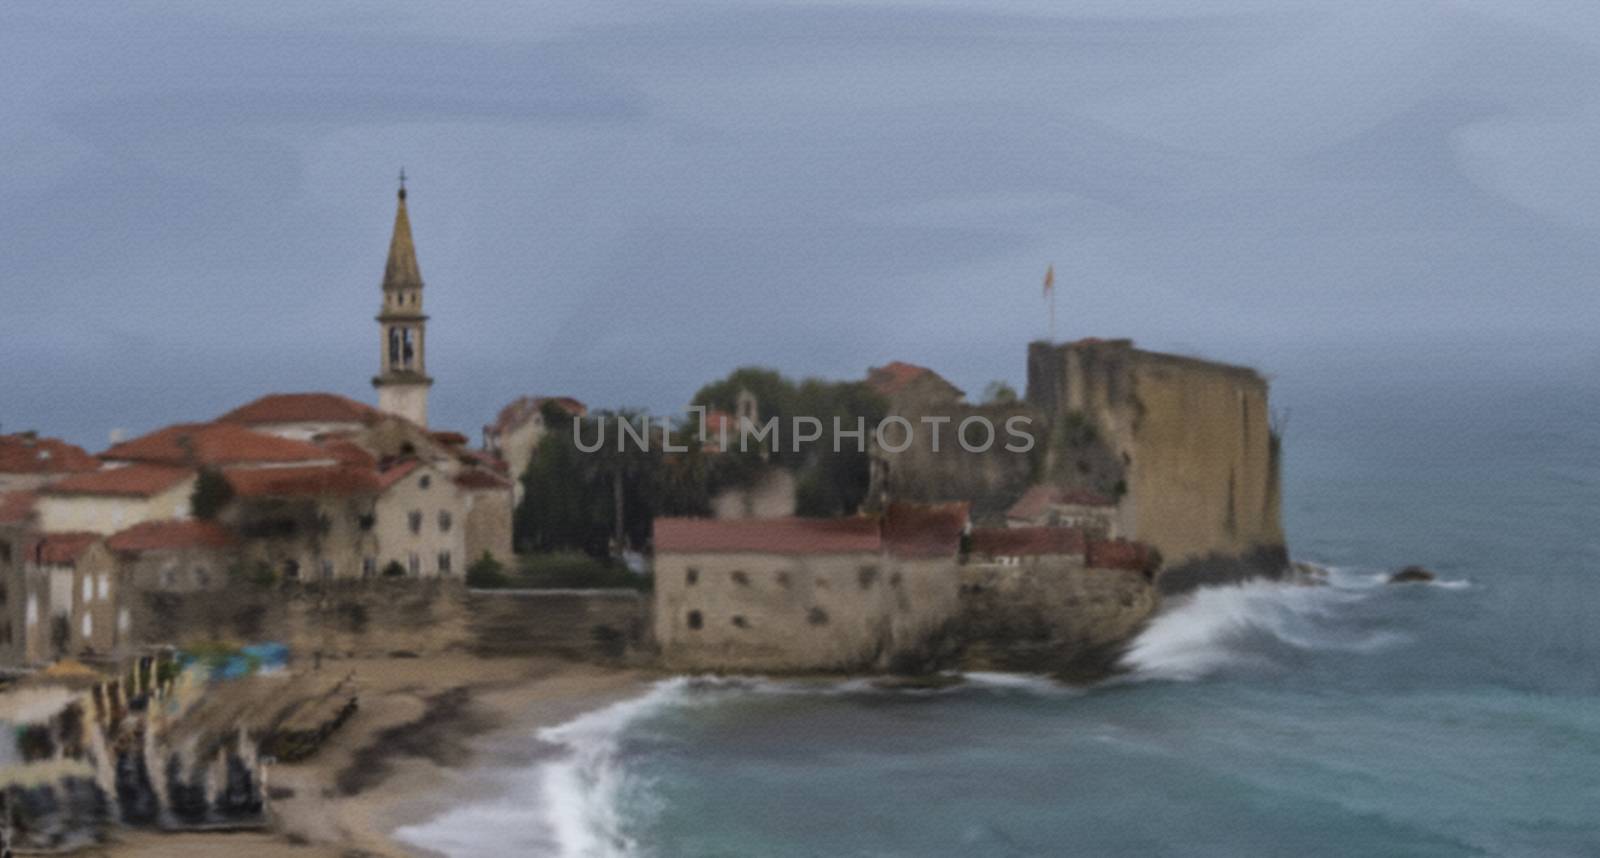 A rainy morning in Budva provided a unique and clear view over the old town with Sv. Ivan church and city citadel with fortified walls without seeing the usual mountains in the background, that were hidden behind the rain curtain